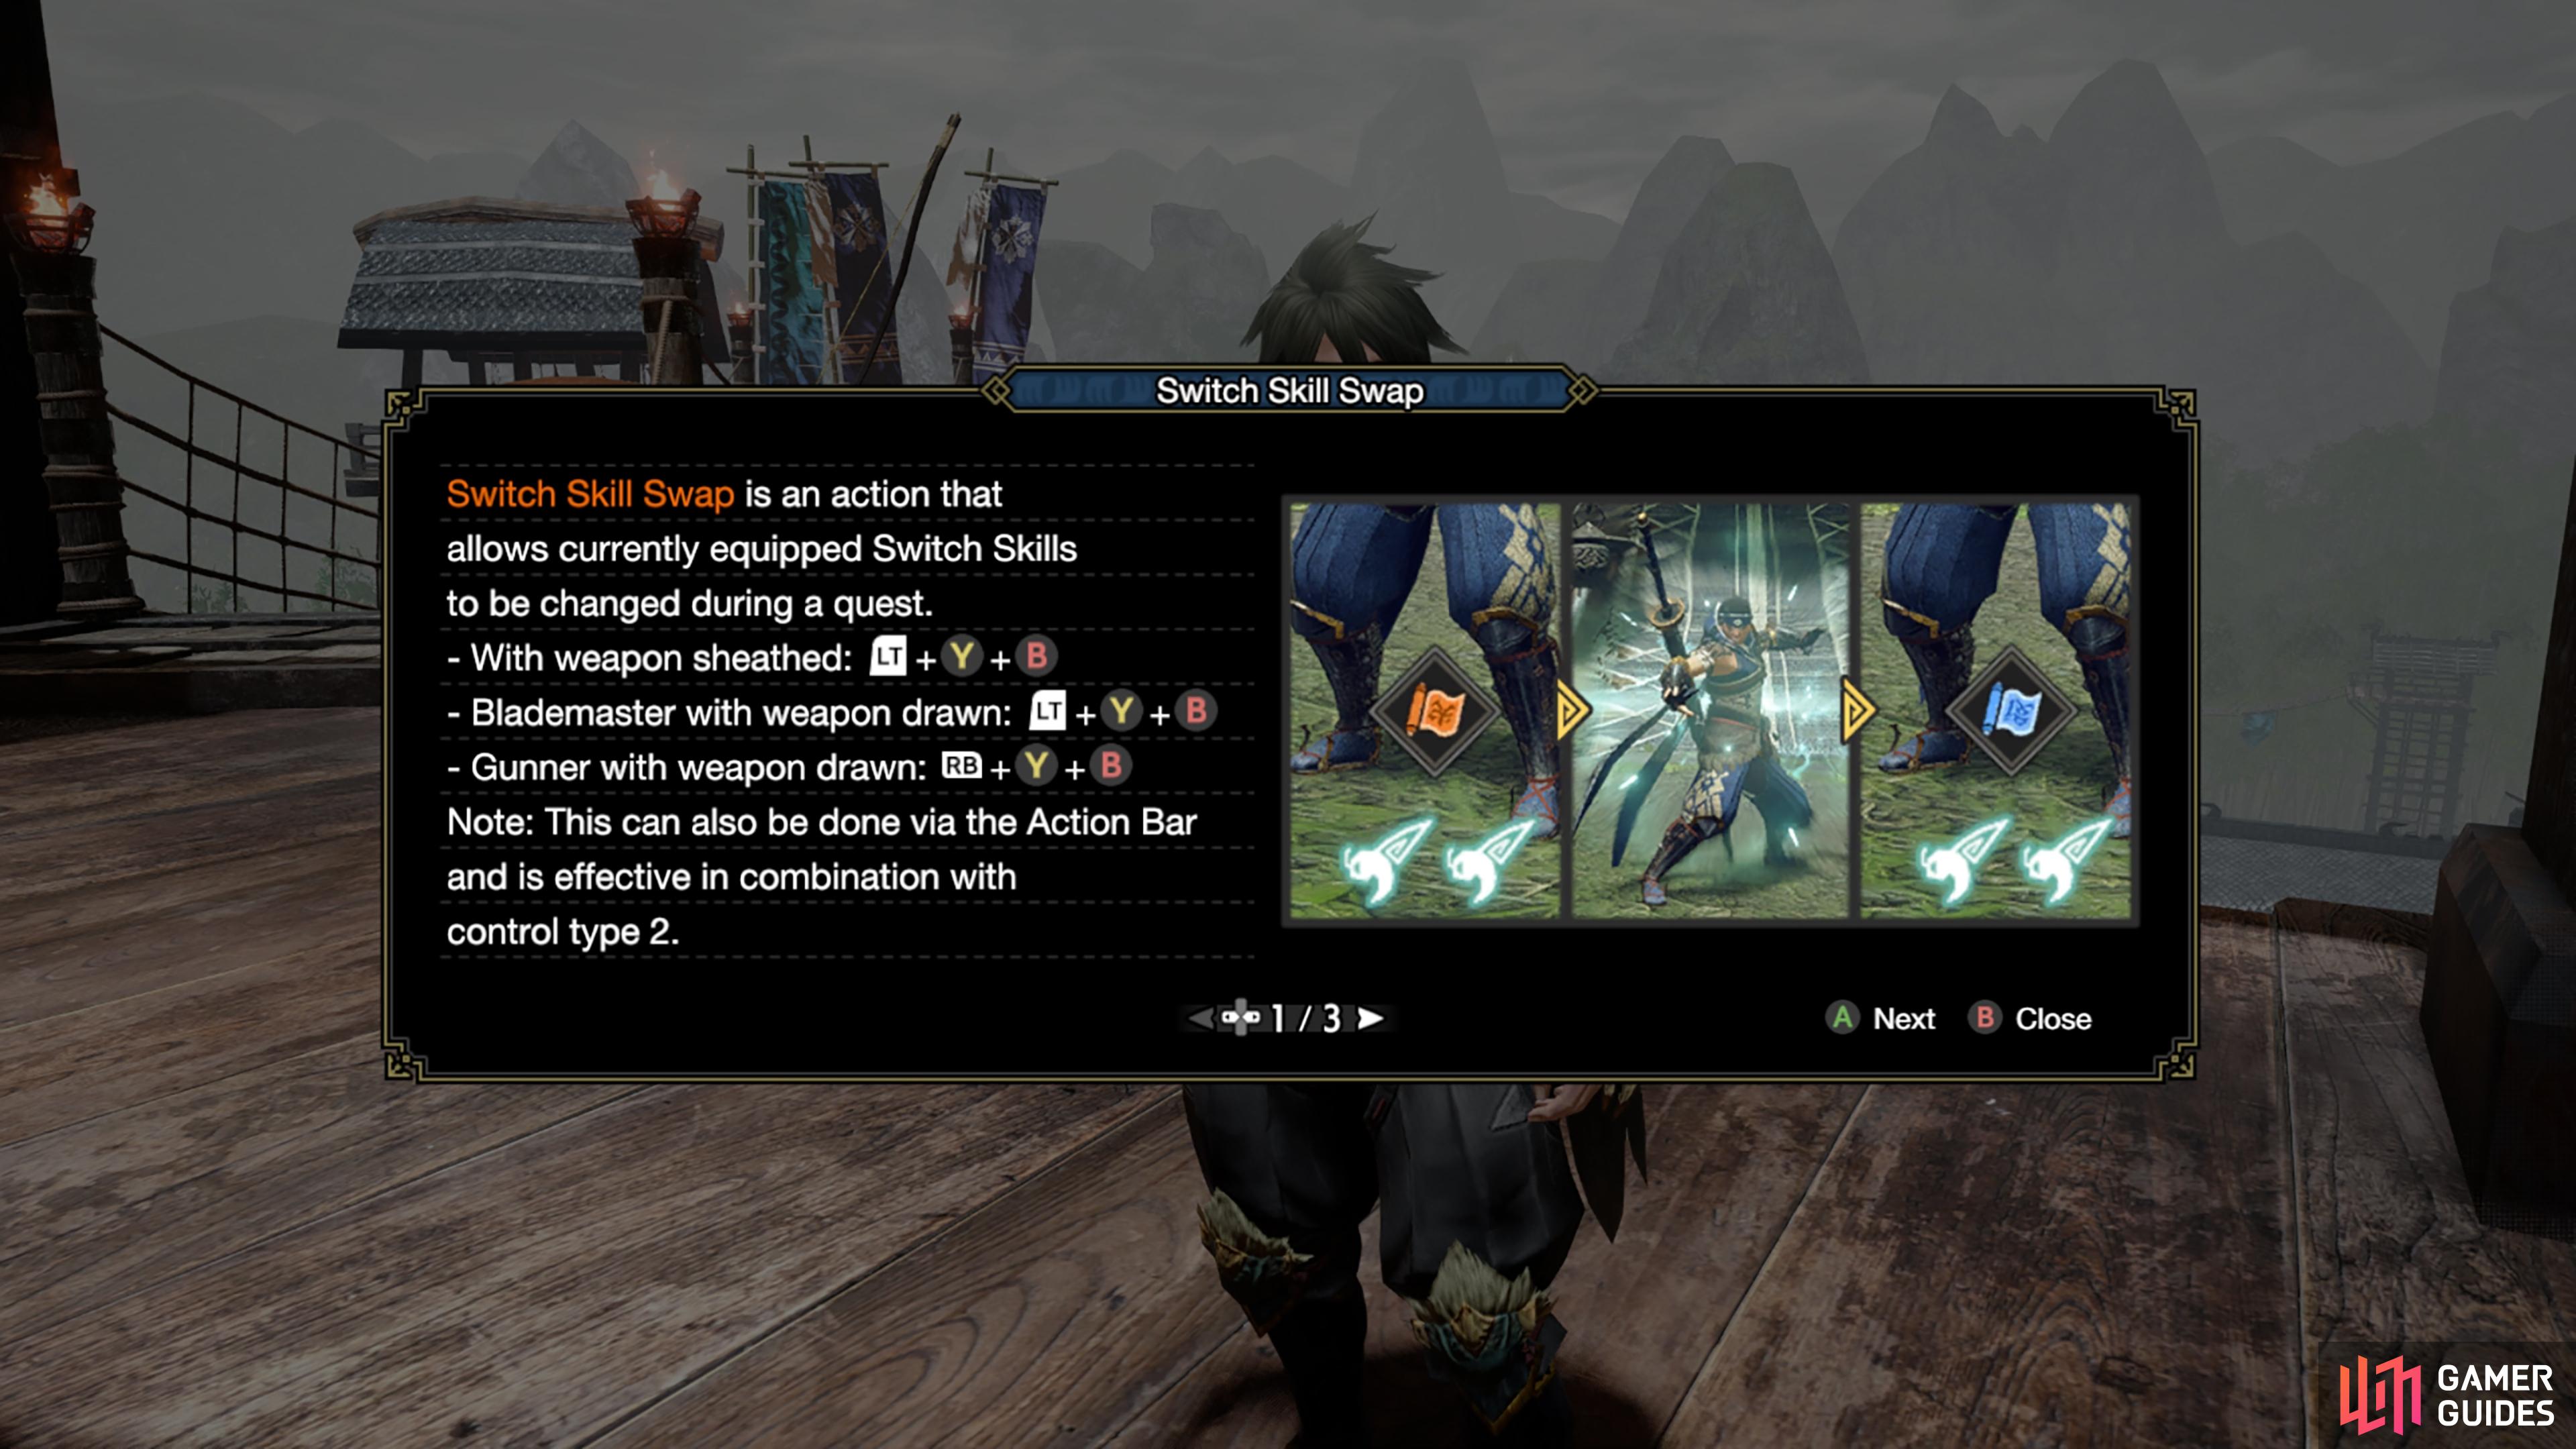 Monster Hunter Rise: Gameplay Shows Off New Abilities, Combat and